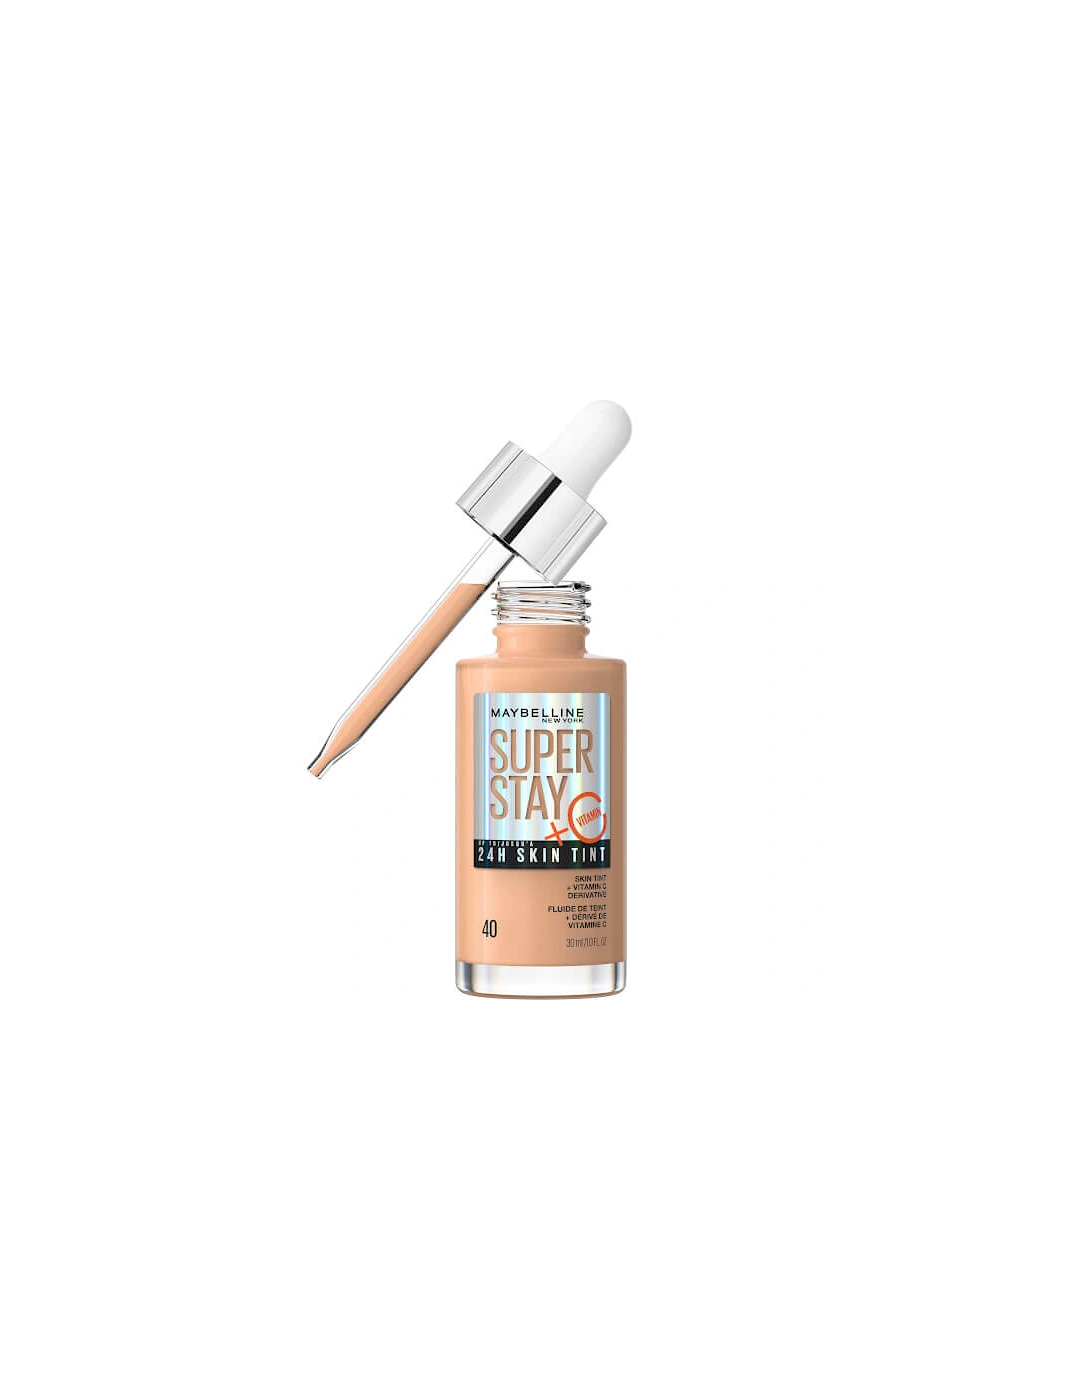 Super Stay up to 24H Skin Tint Foundation + Vitamin C - Shade 40, 2 of 1